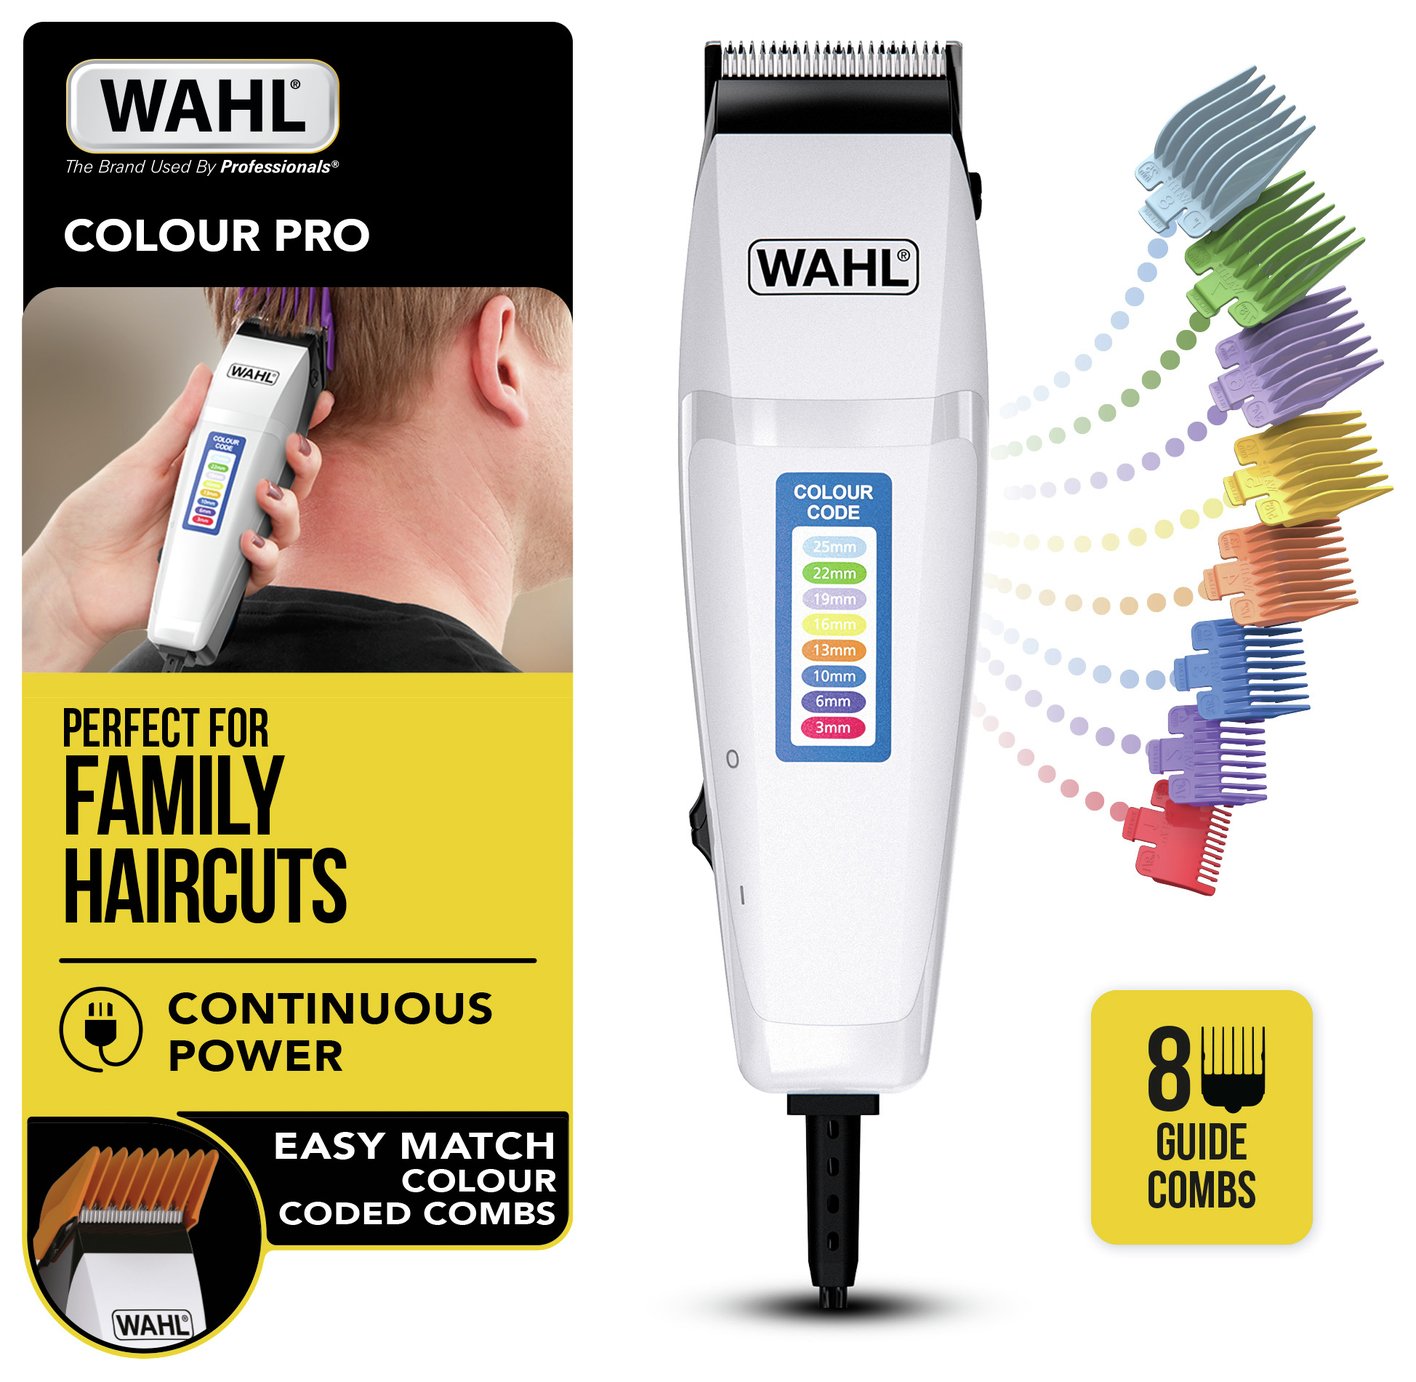 wahl pro colour hair clippers